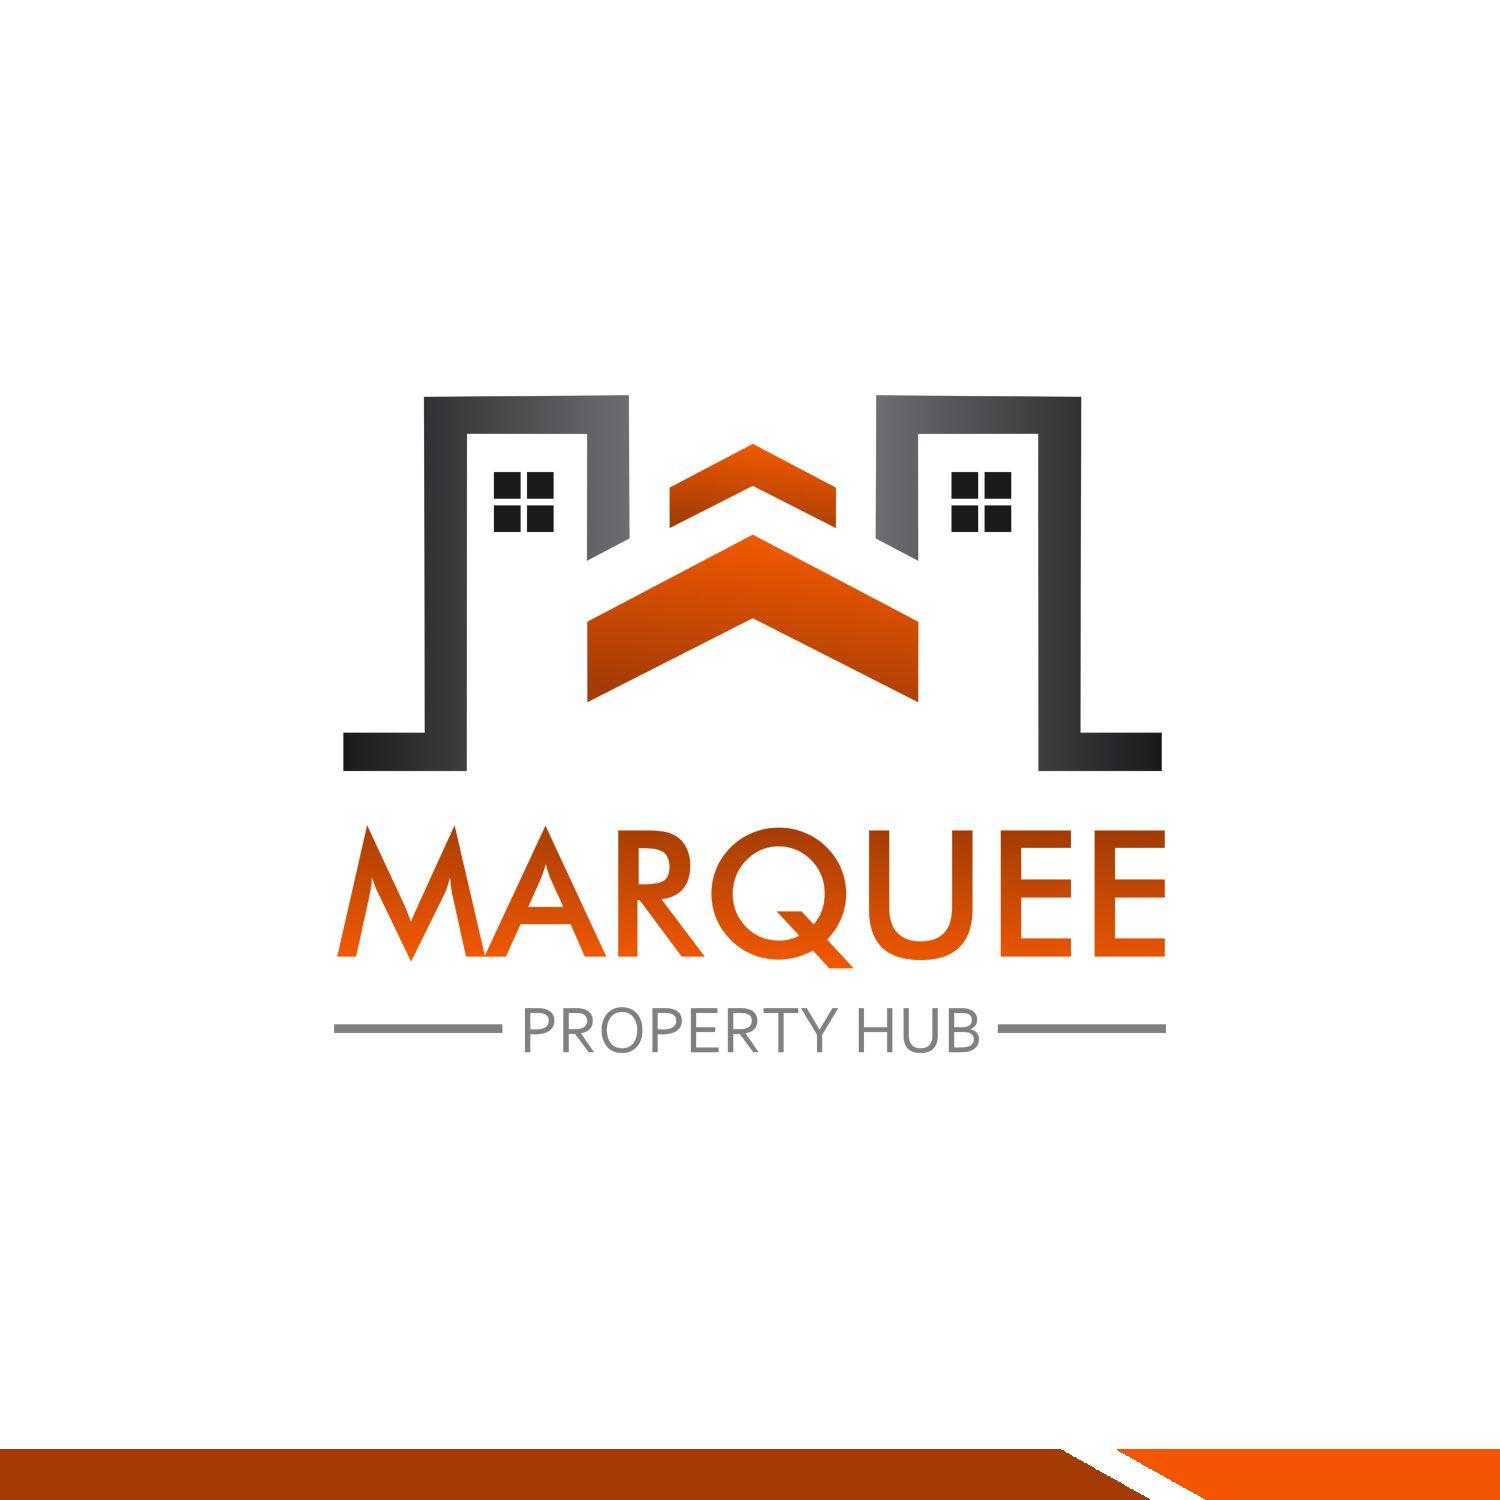 Marquee Logo - Elegant, Playful, Business Logo Design for MARQUEE Property Hub by ...